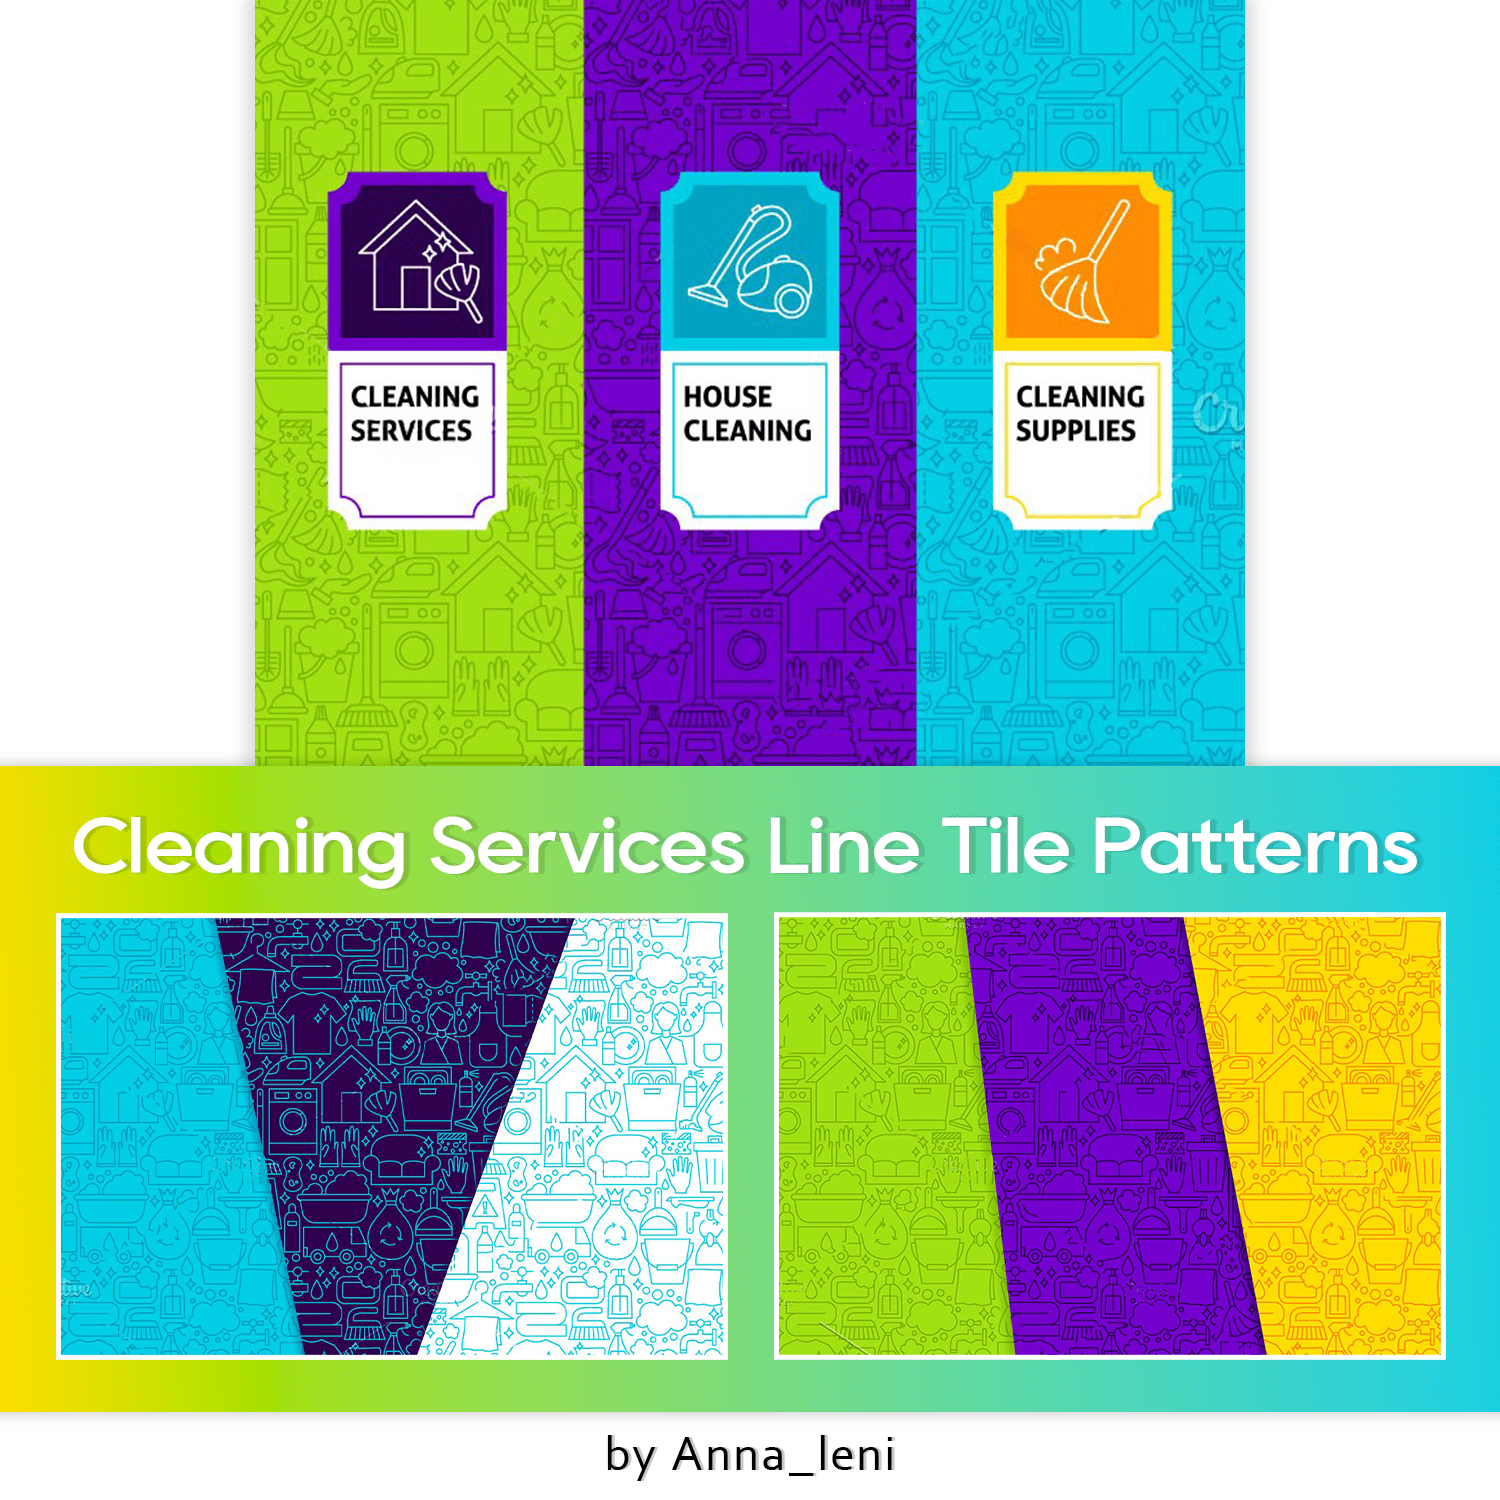 Cleaning Services Line Tile Patterns cover.